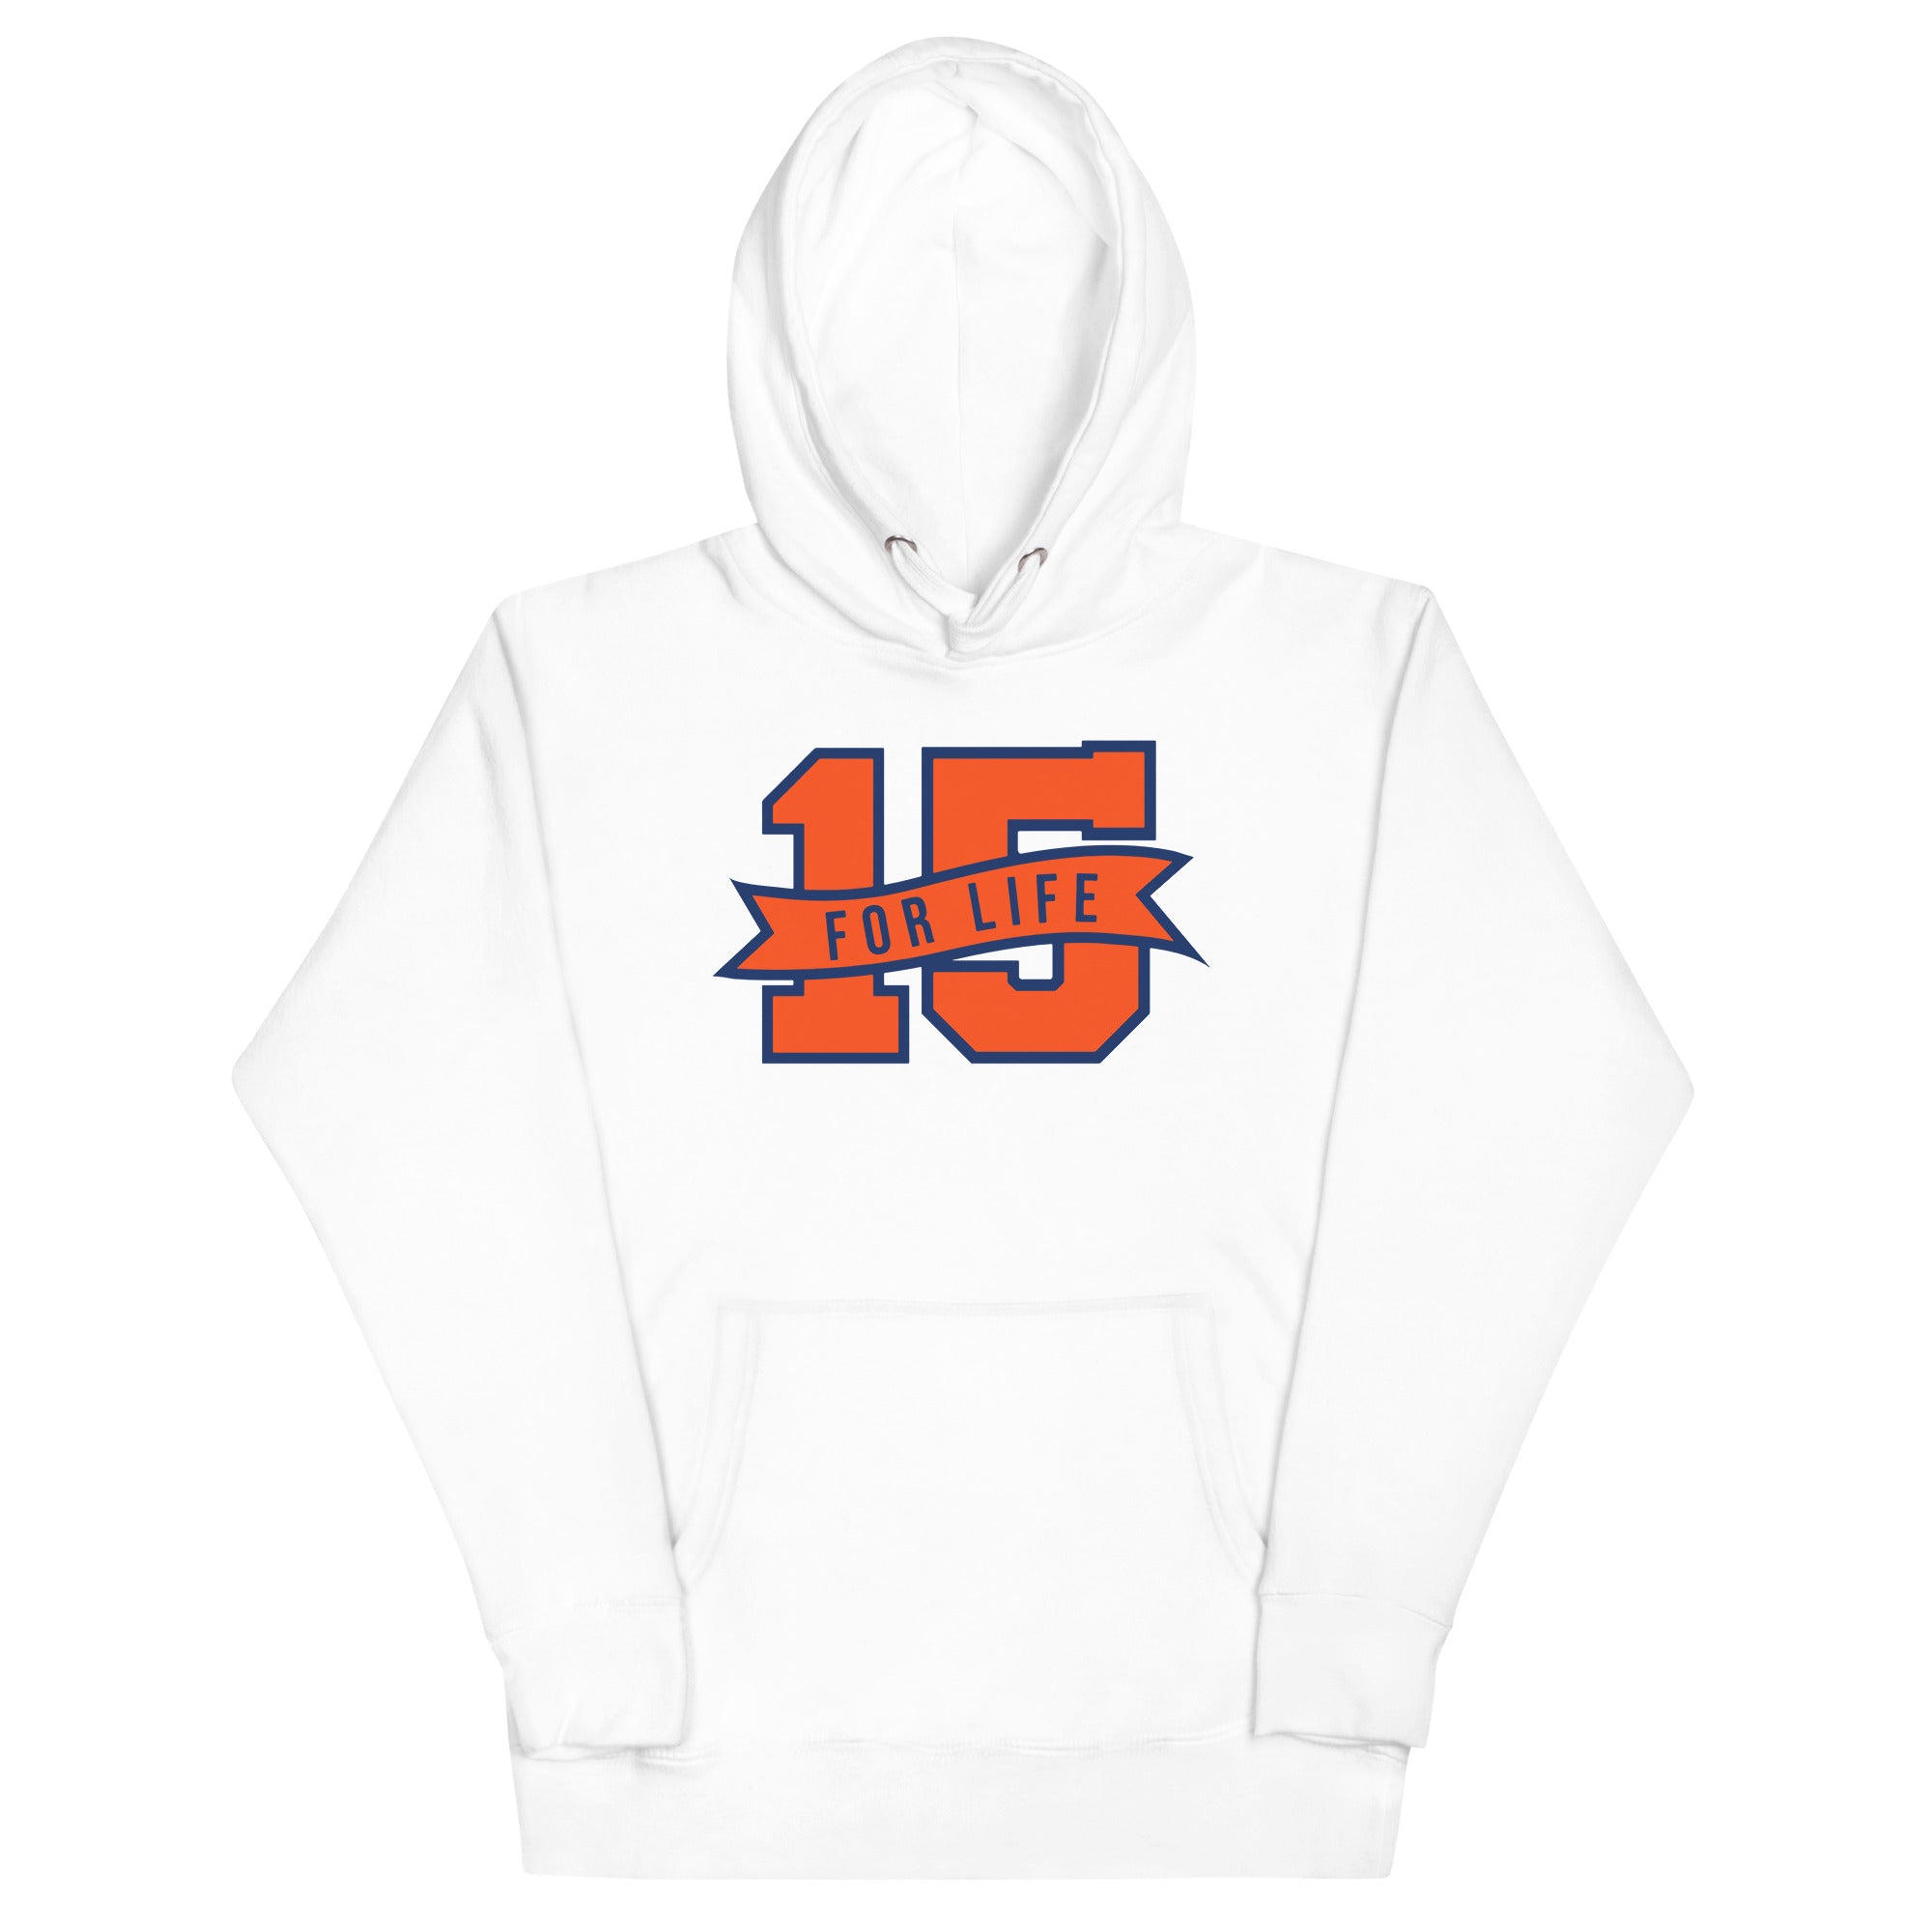 15 For Life Unisex Hoodie